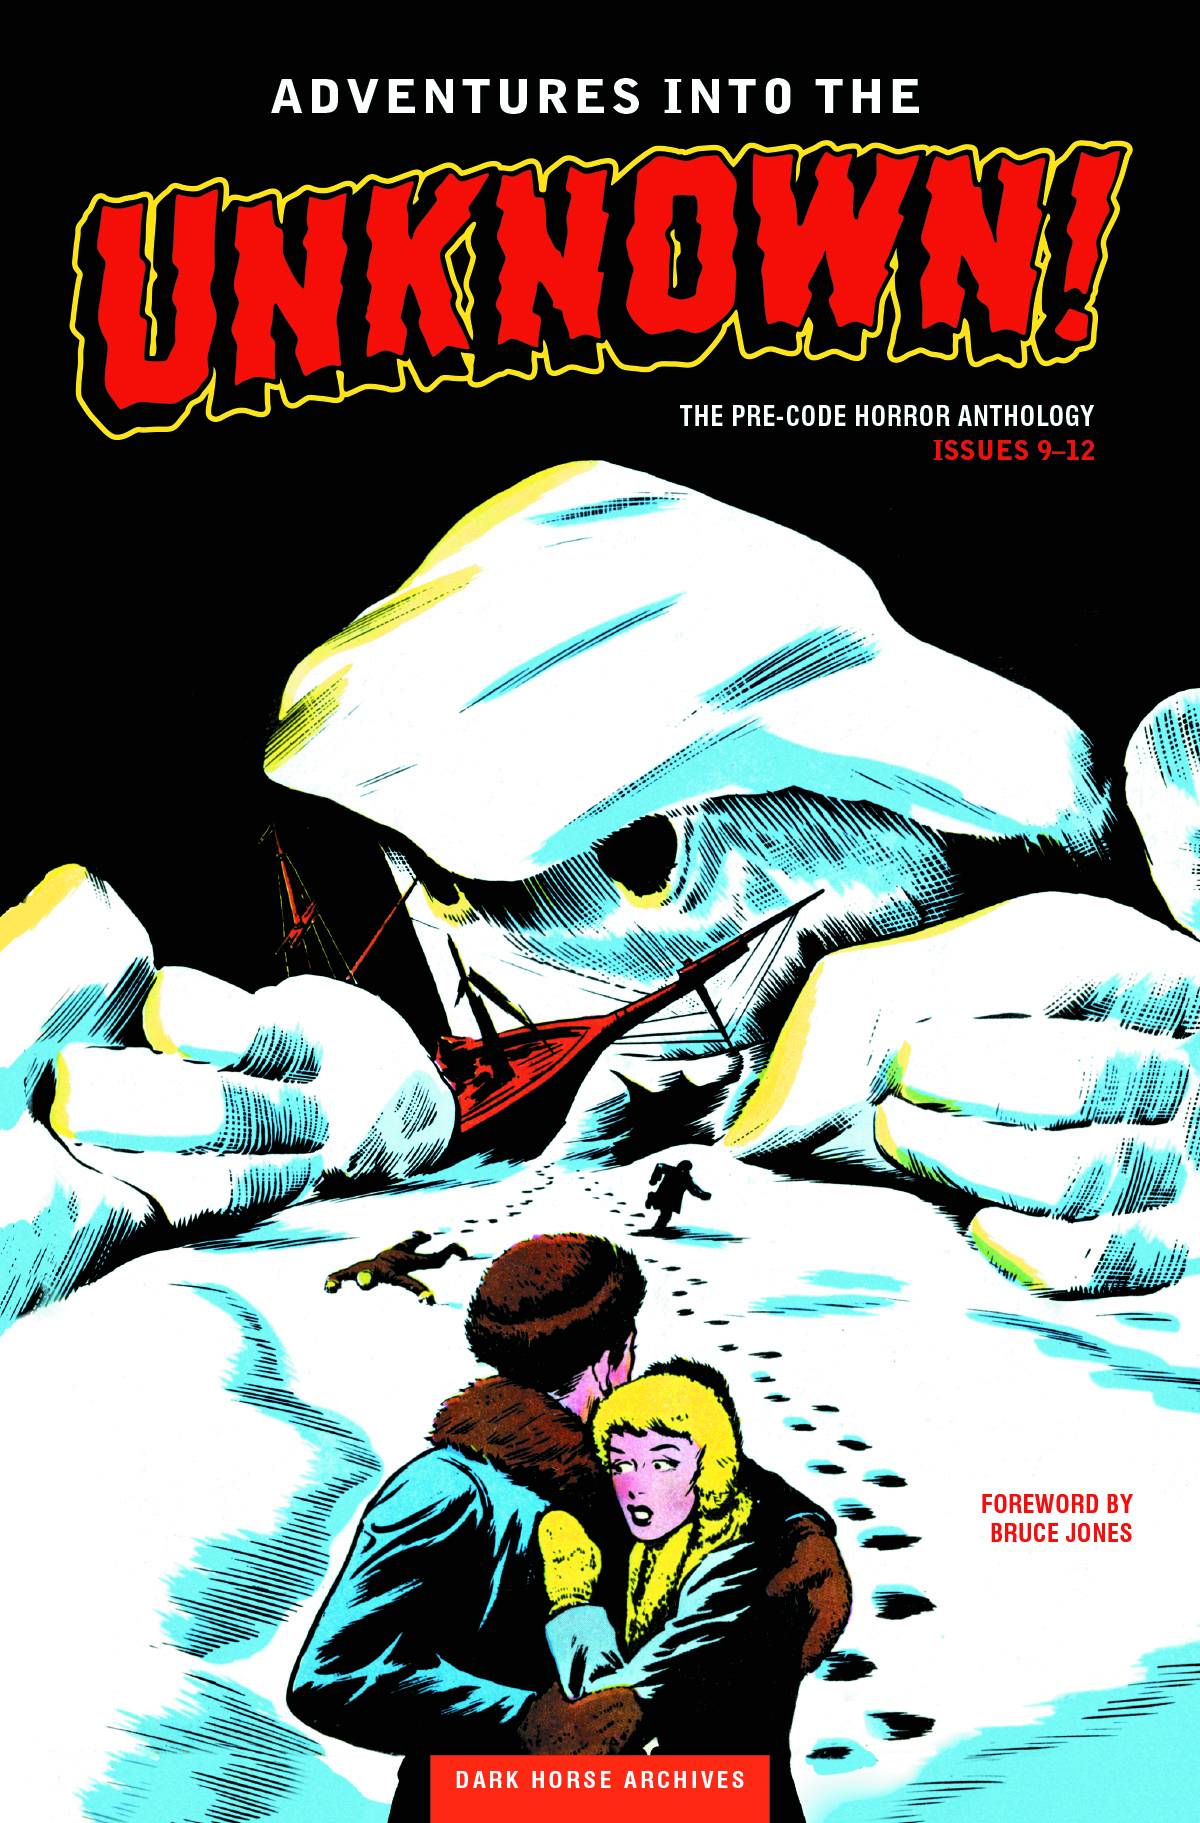 Adventures Into the Unknown Archives Hardcover Volume 3